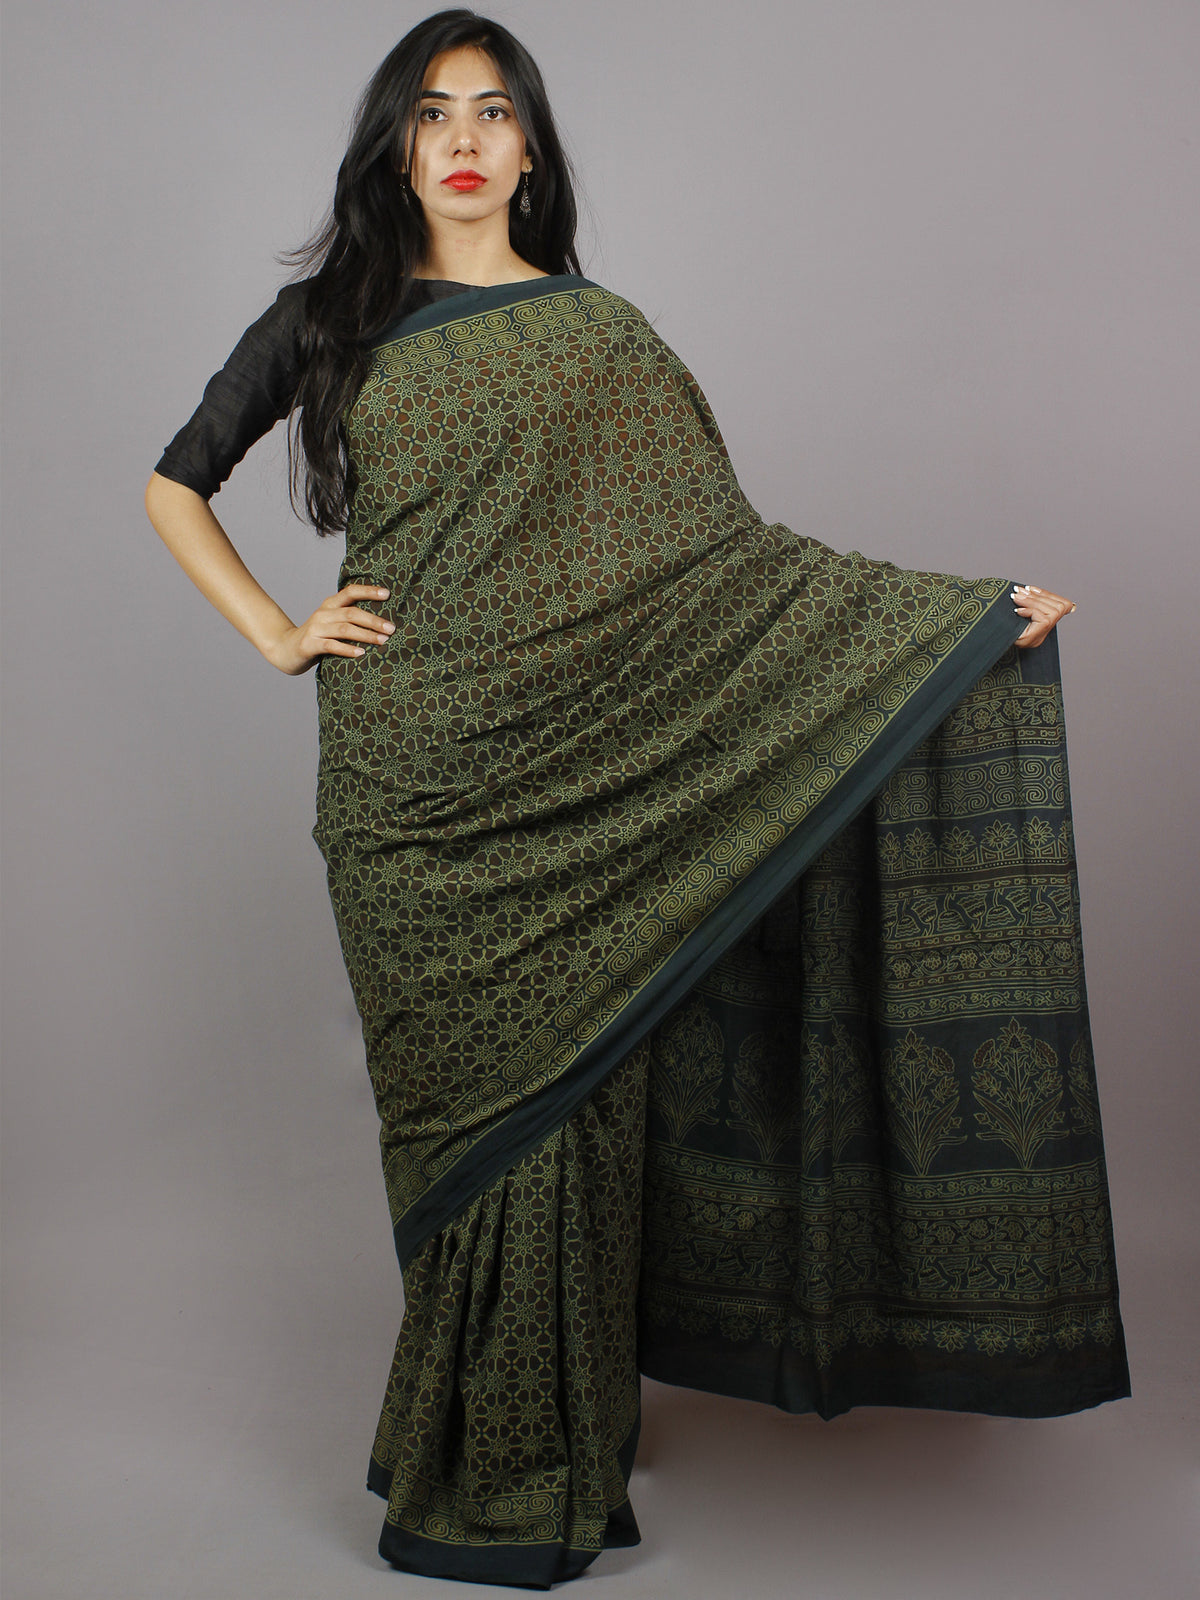 Green Brown Beige Mughal Nakashi Ajrakh Hand Block Printed in Natural Vegetable Colors Cotton Mul Saree - S031701275